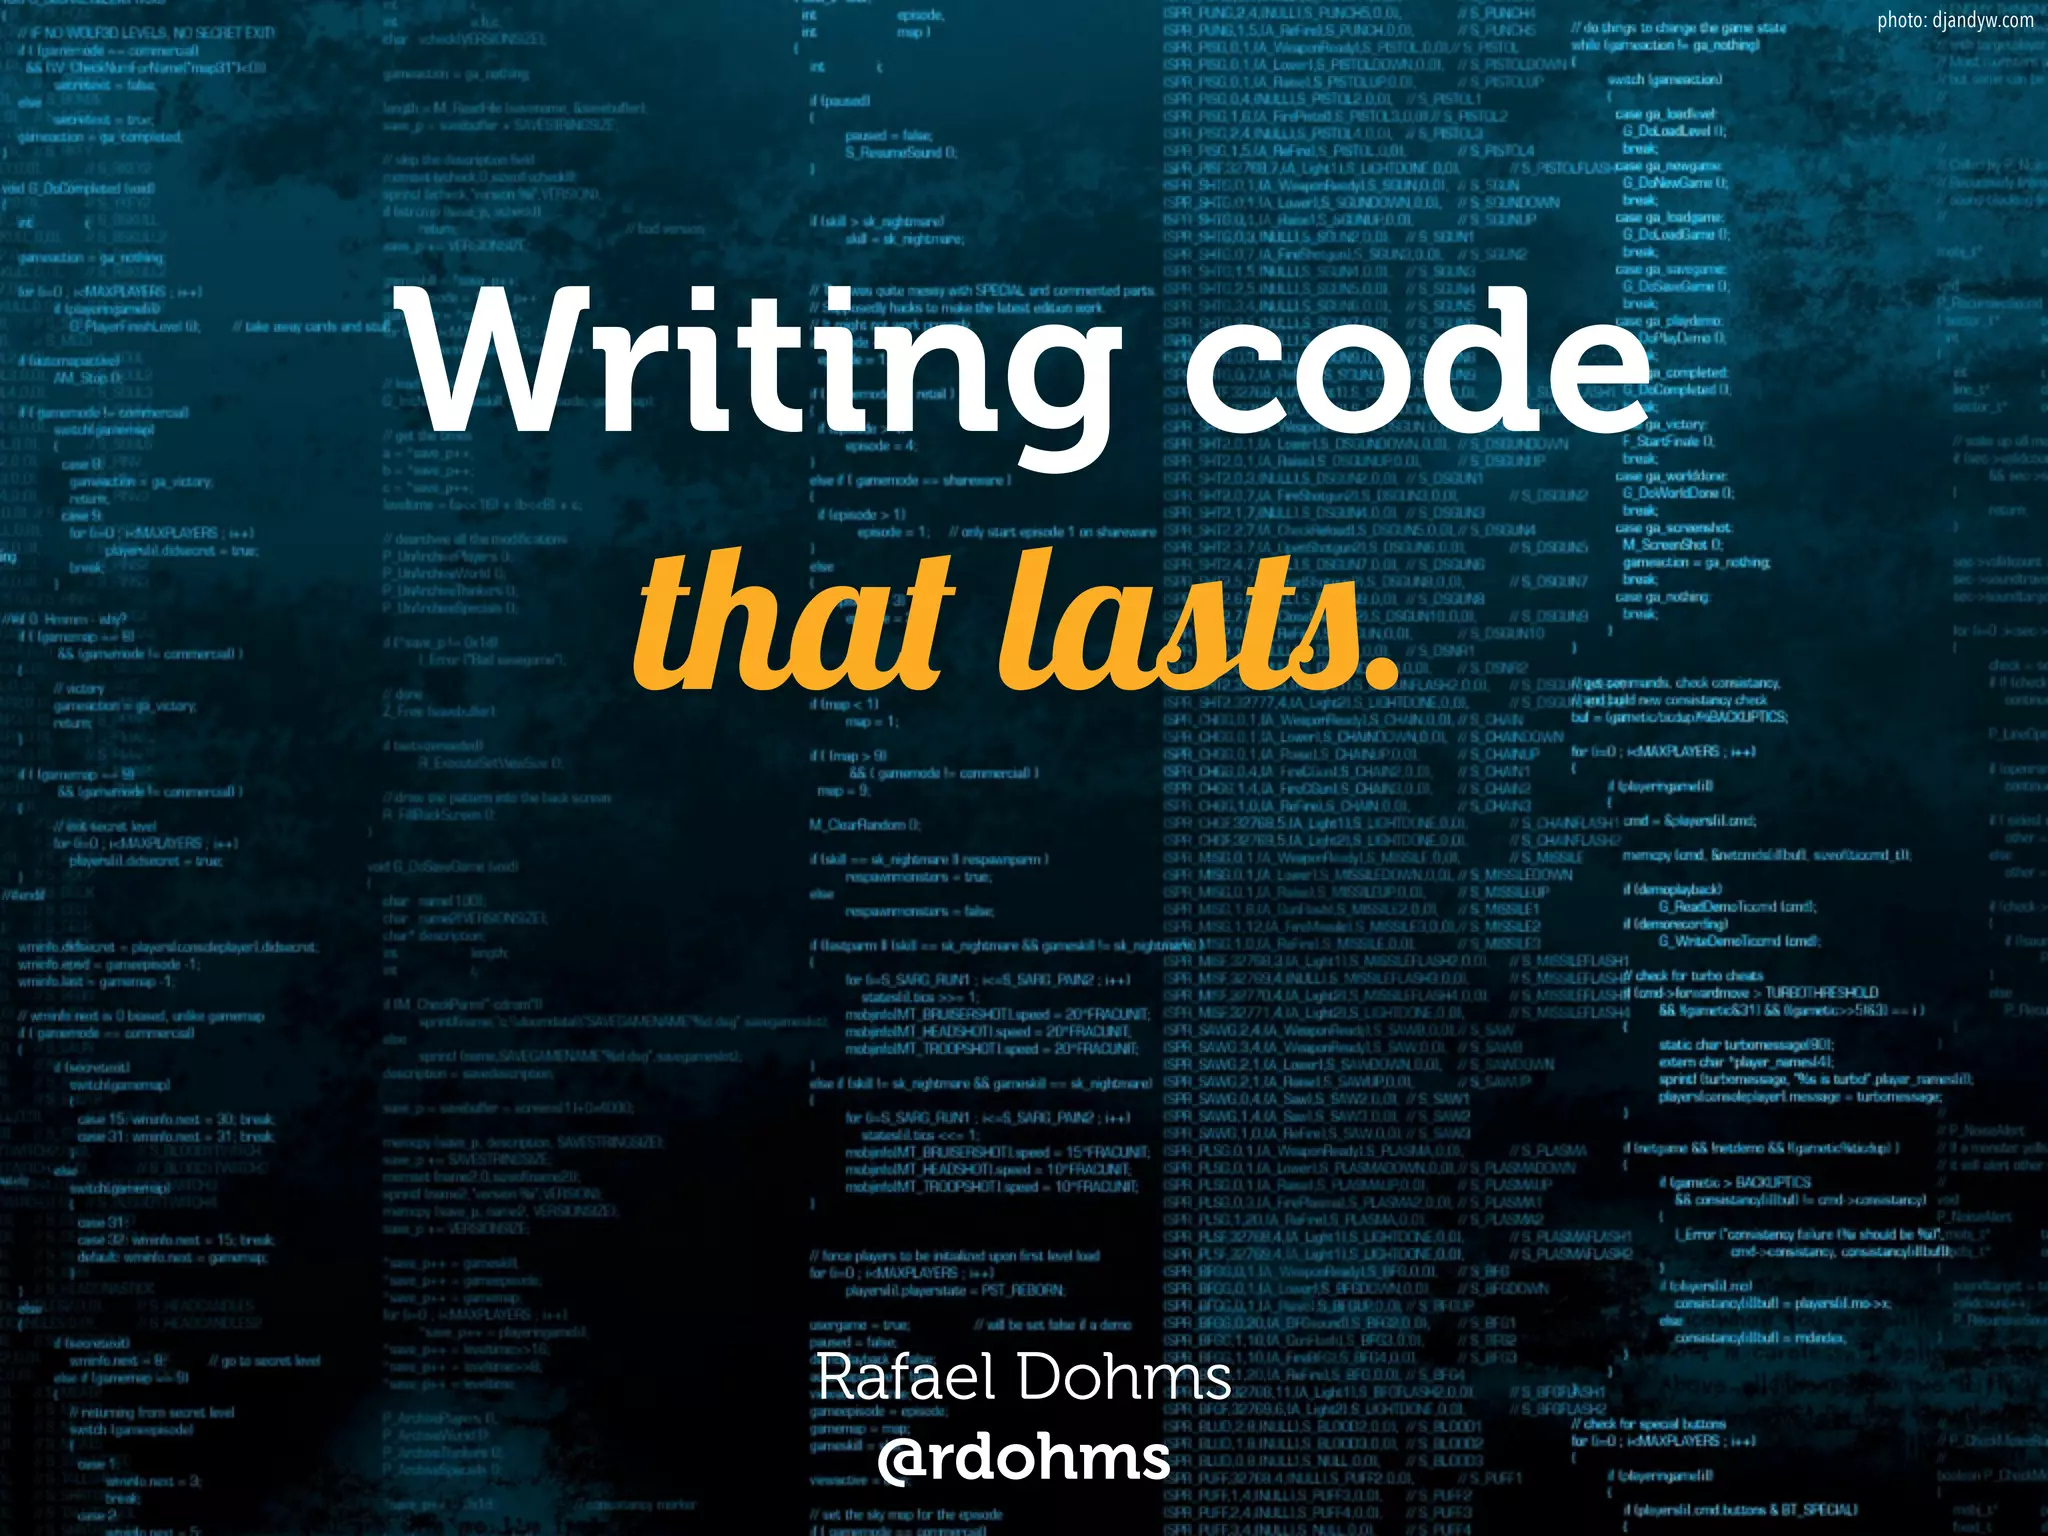 Writing code that lasts